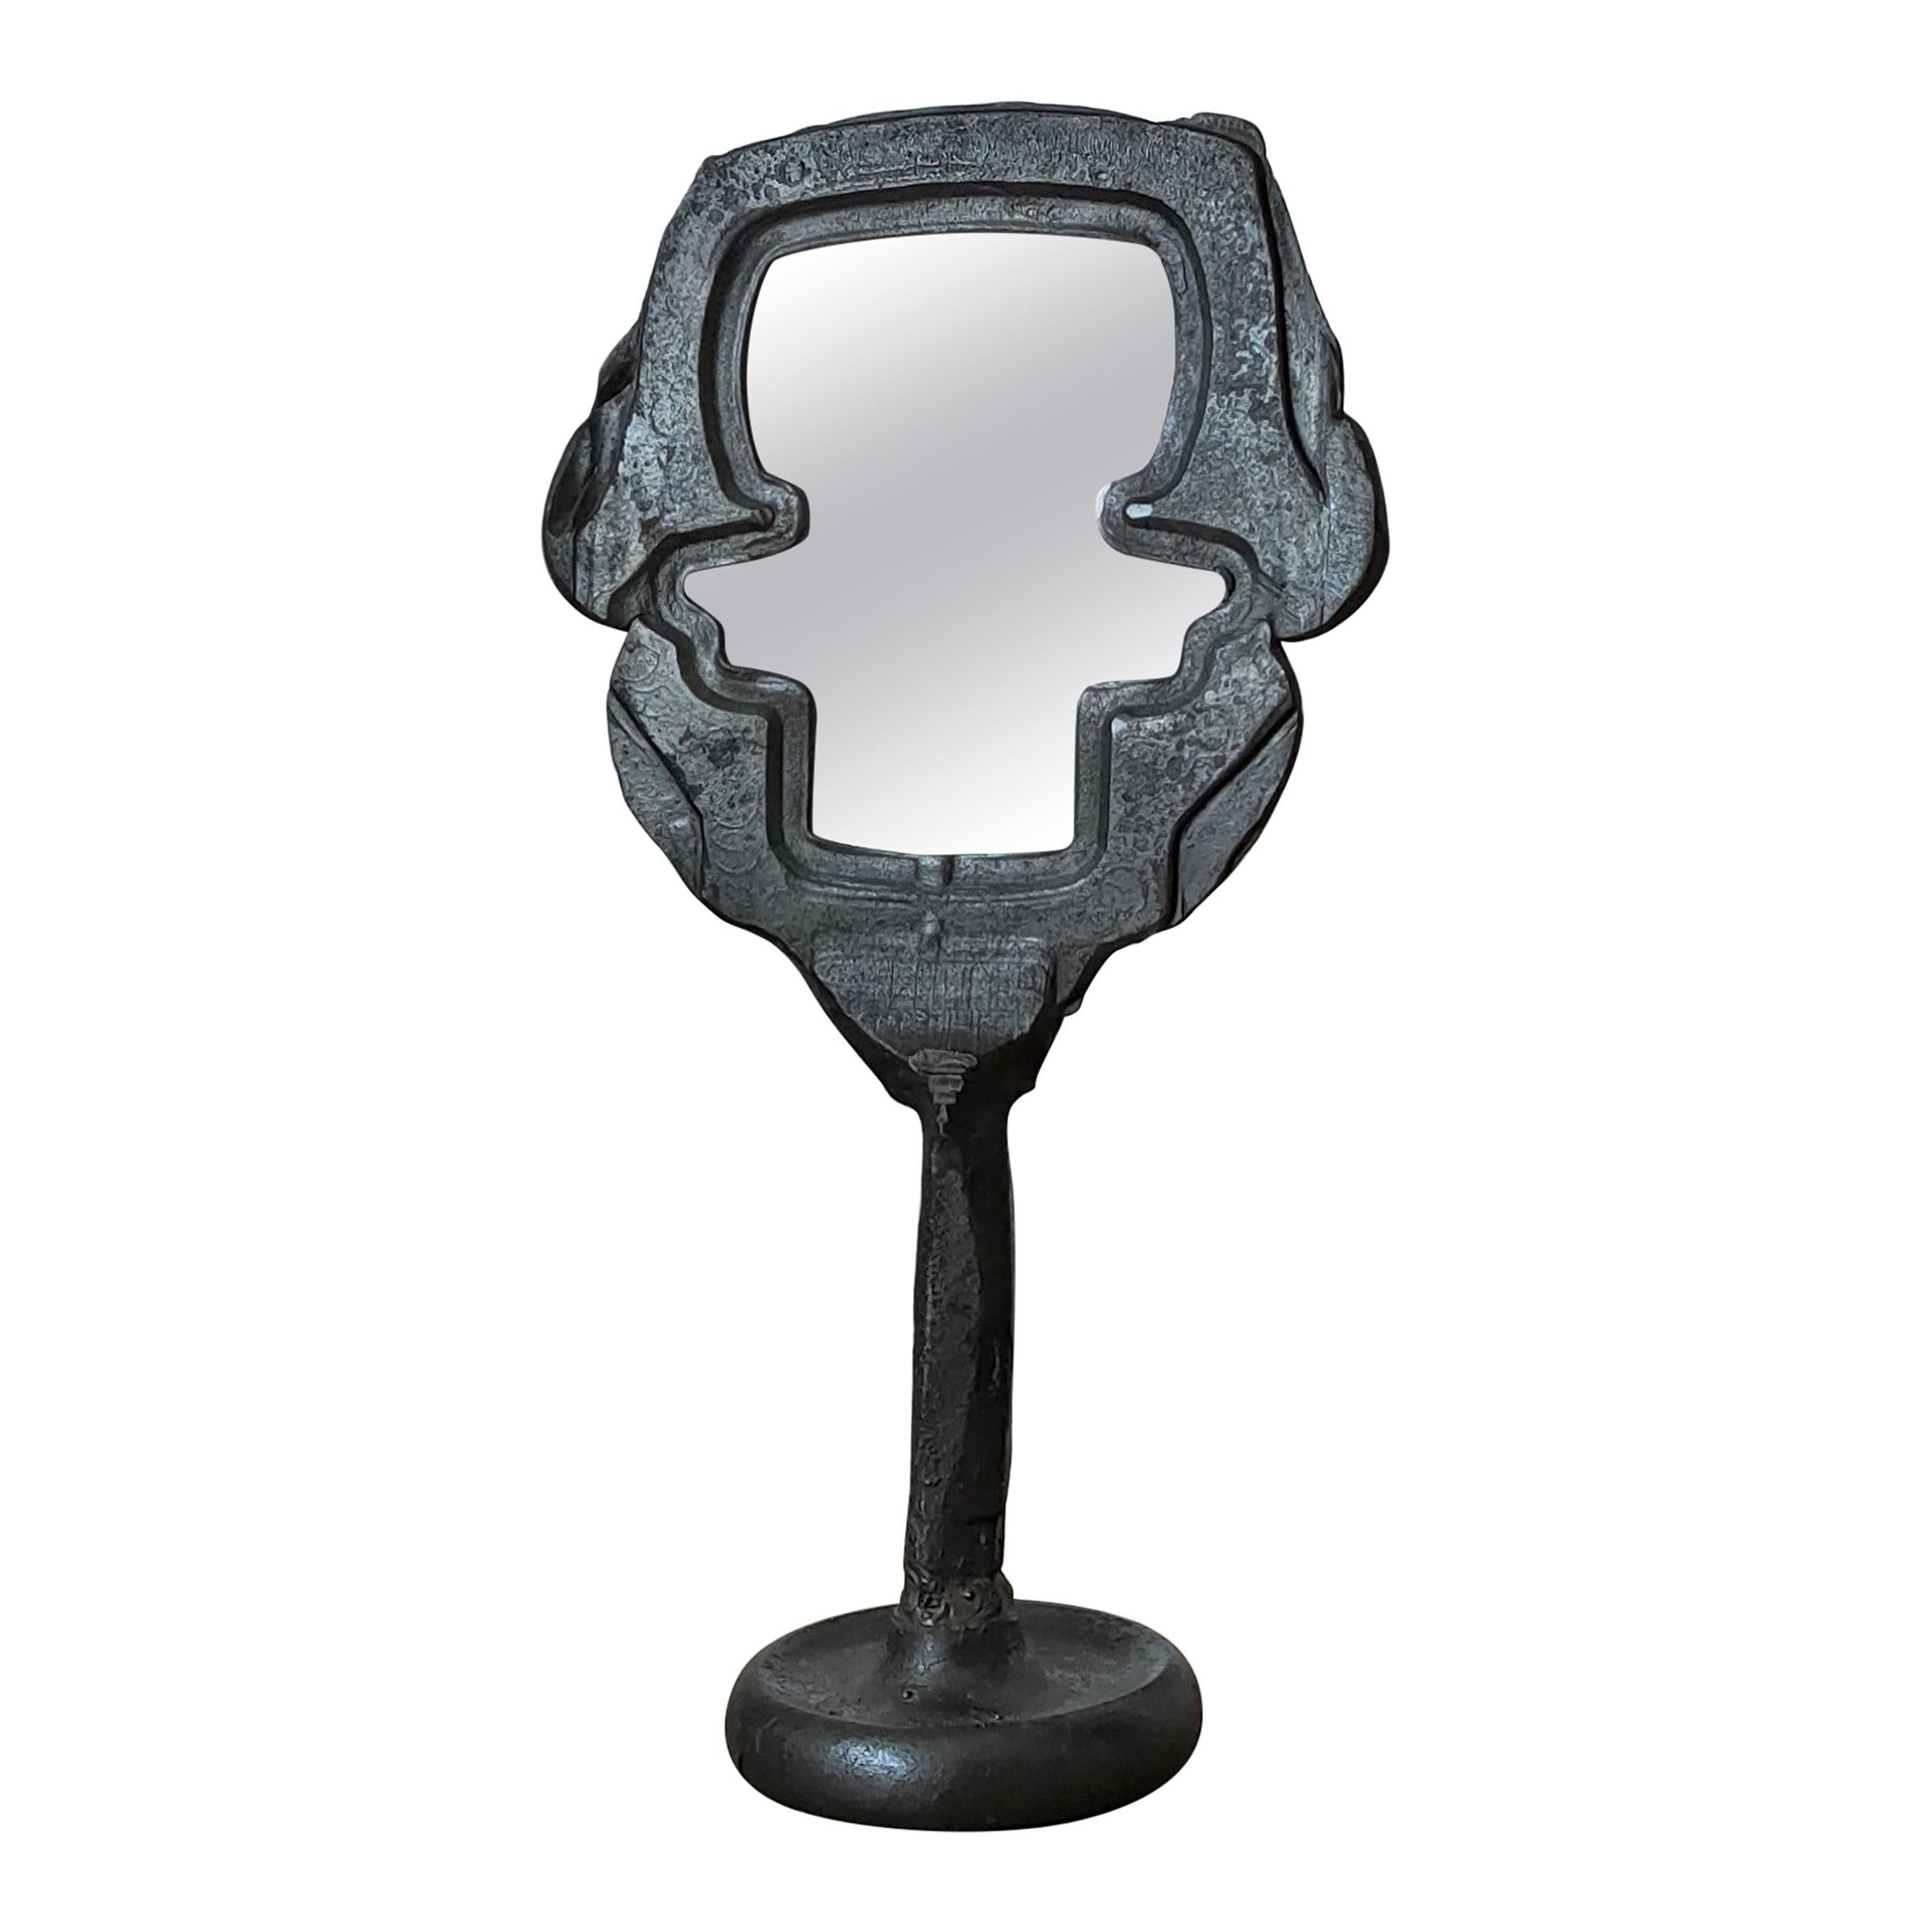 One of a Kind Cast Iron Brutalist Psyché Table Mirror, France, 1970's